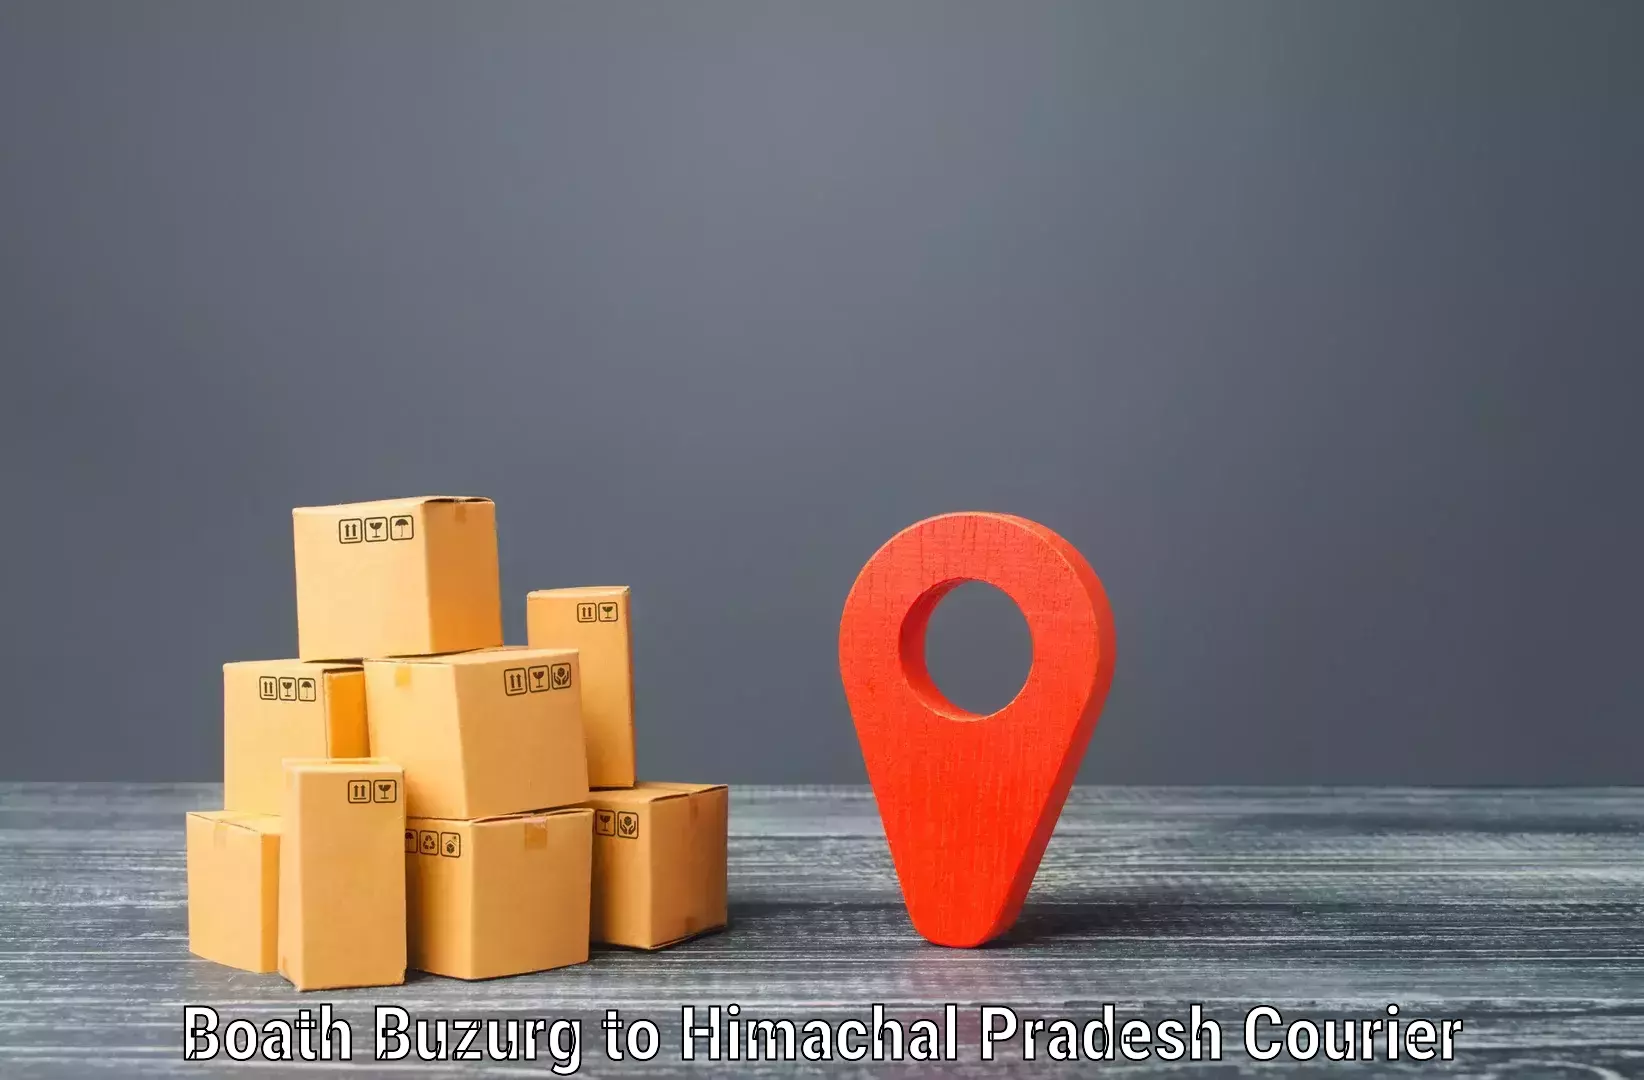 Full-service courier options Boath Buzurg to Himachal Pradesh